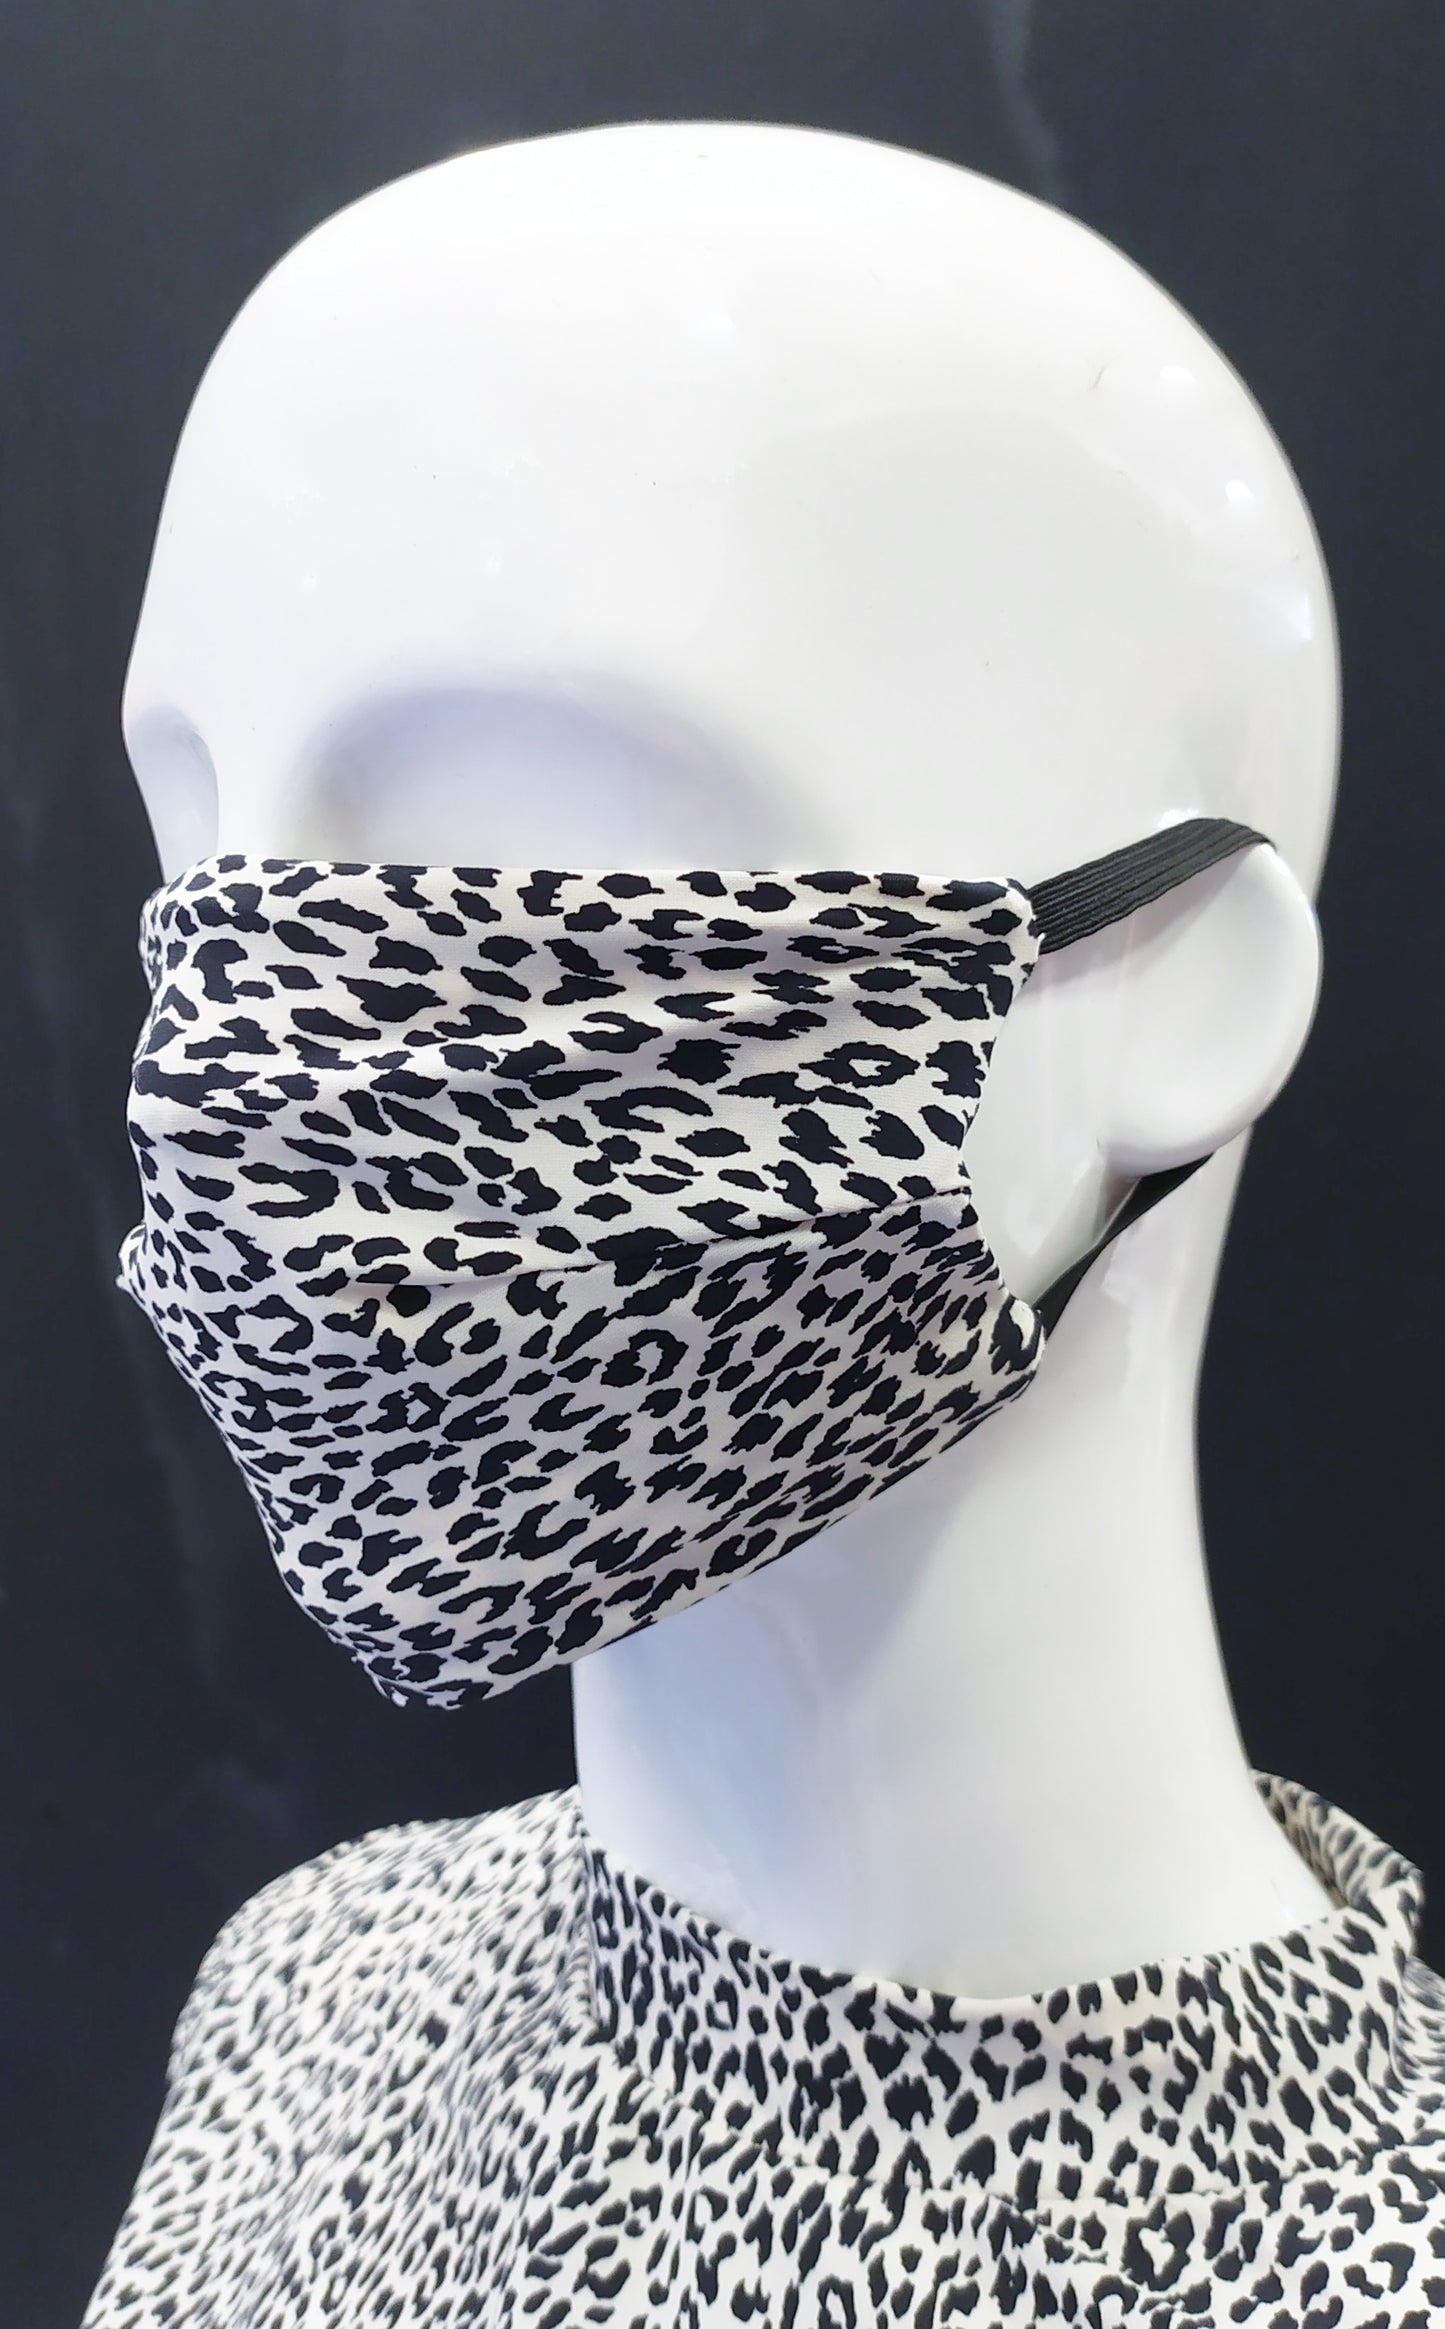 Leopard Black and white Face mask Stretchy Fabric mask